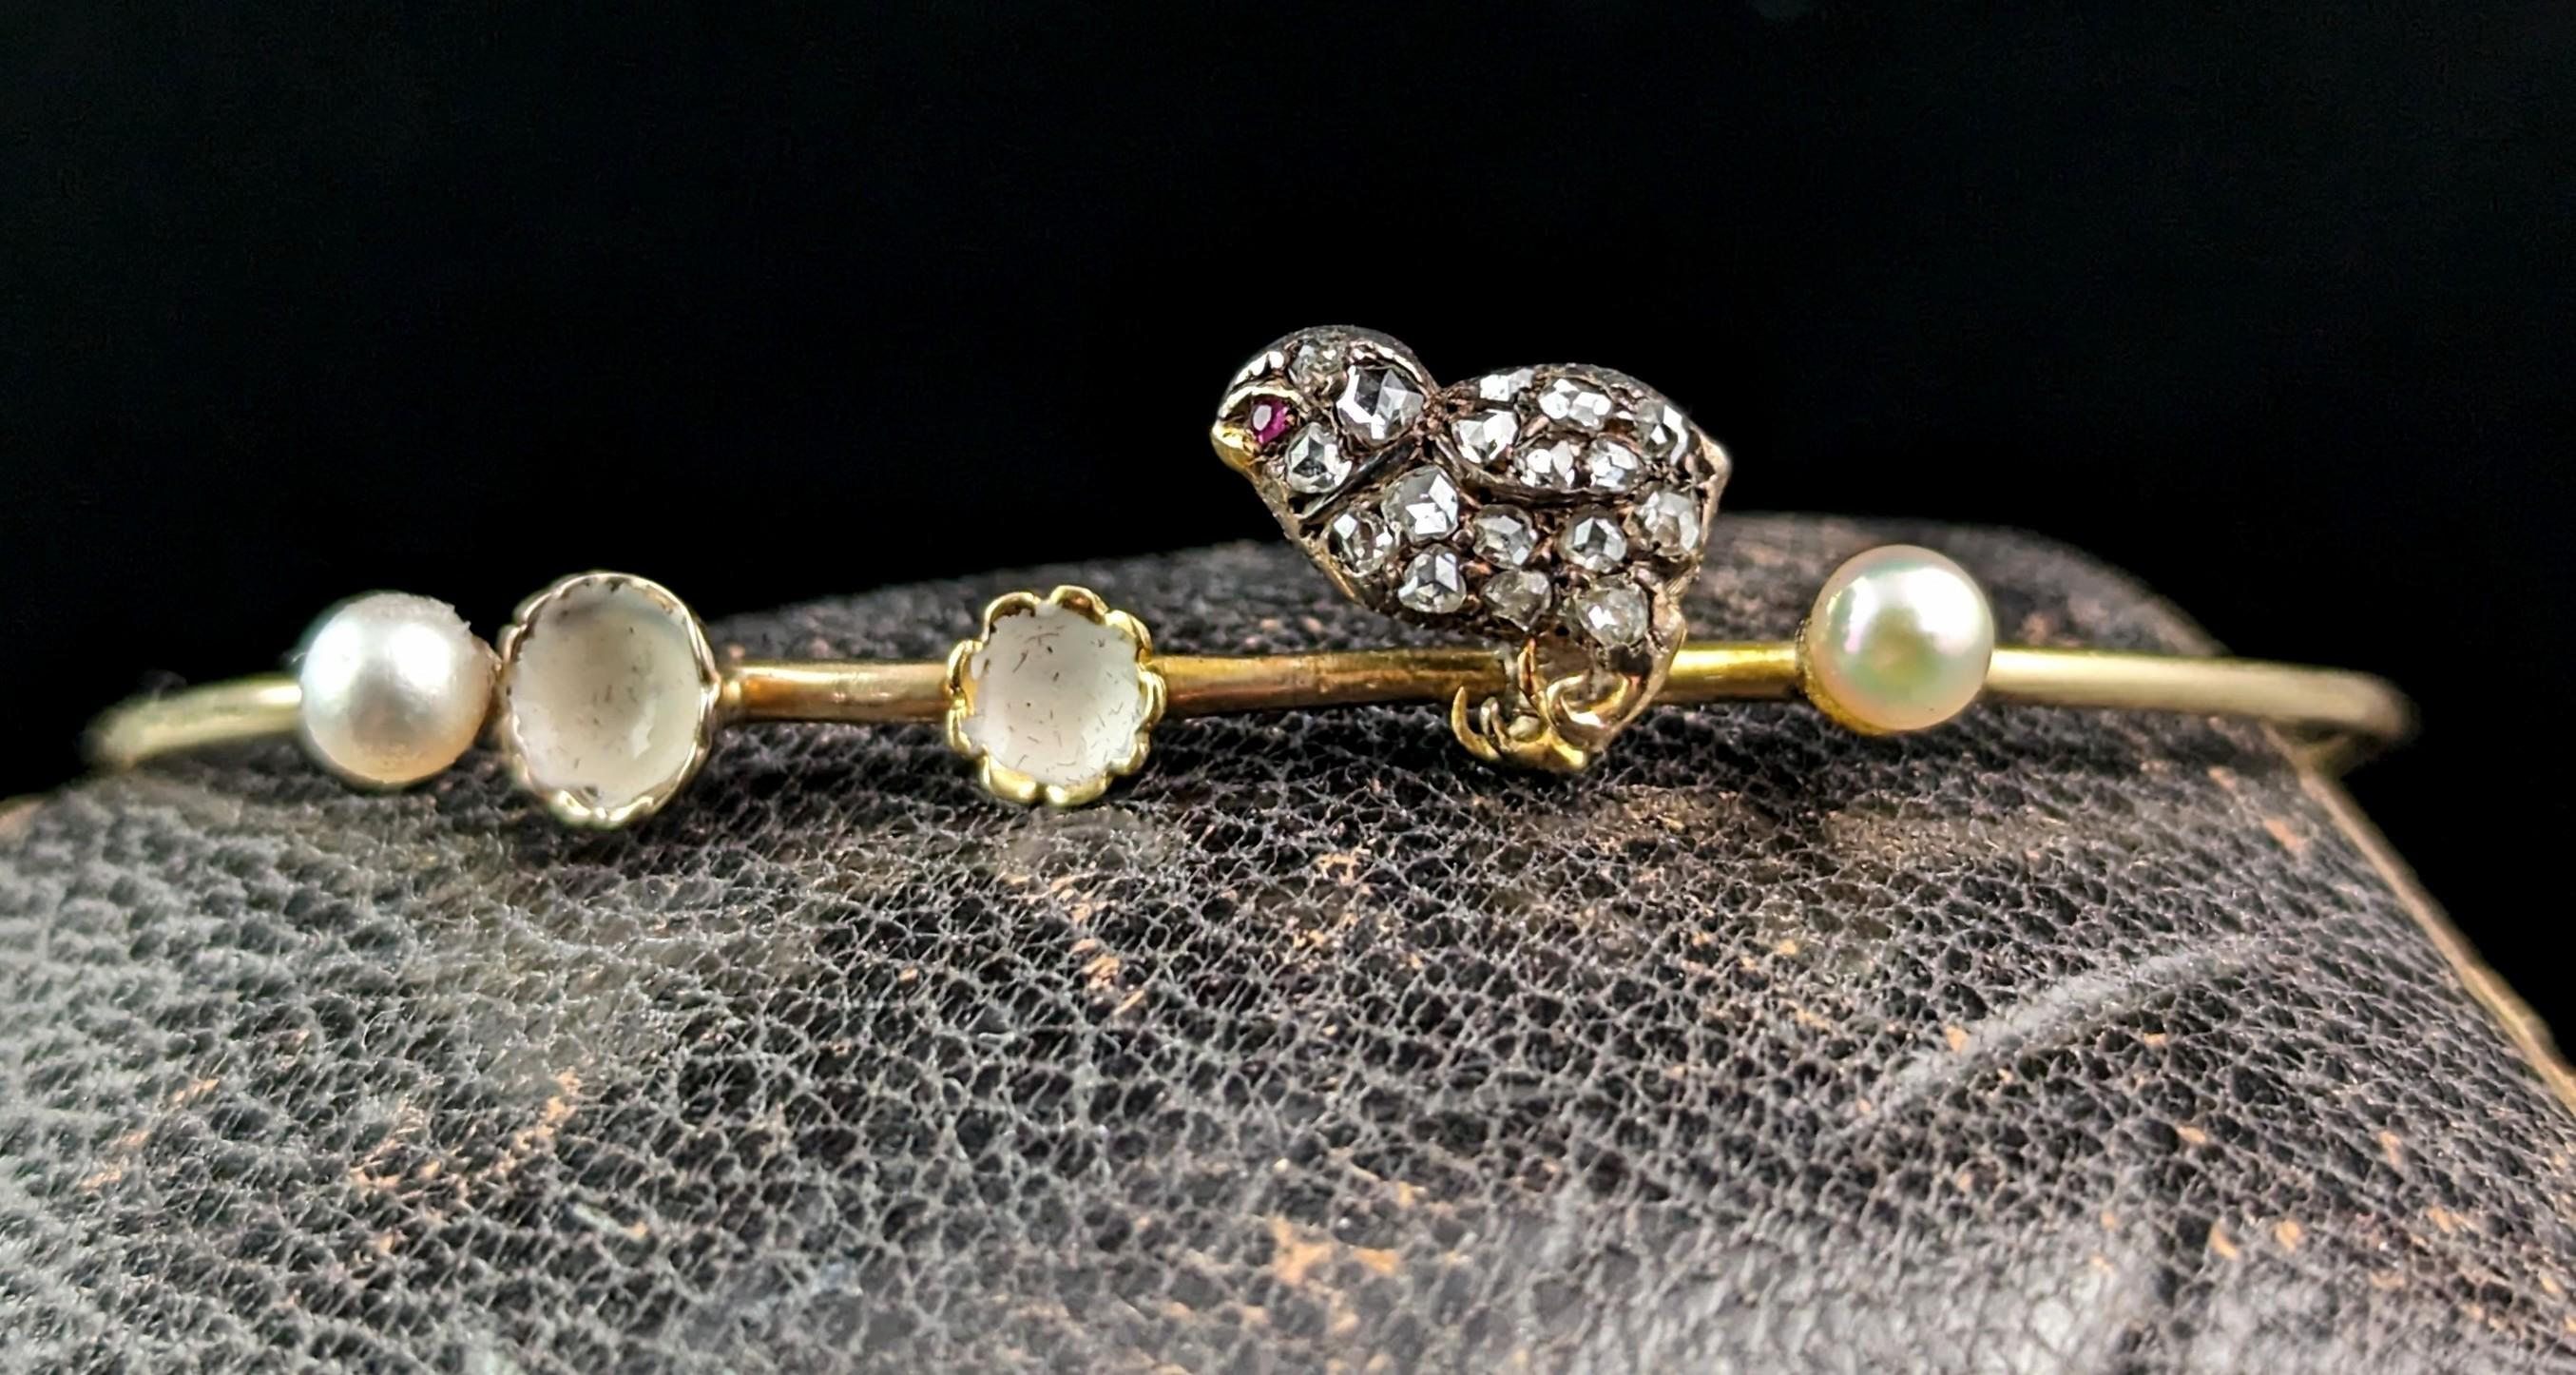 Words simply cannot express how wonderful this piece is, an antique Diamond Chick bangle hailing from the late Victorian era.

Such a rare piece to find, these little chicks were most often found on brooches or converted from brooches to